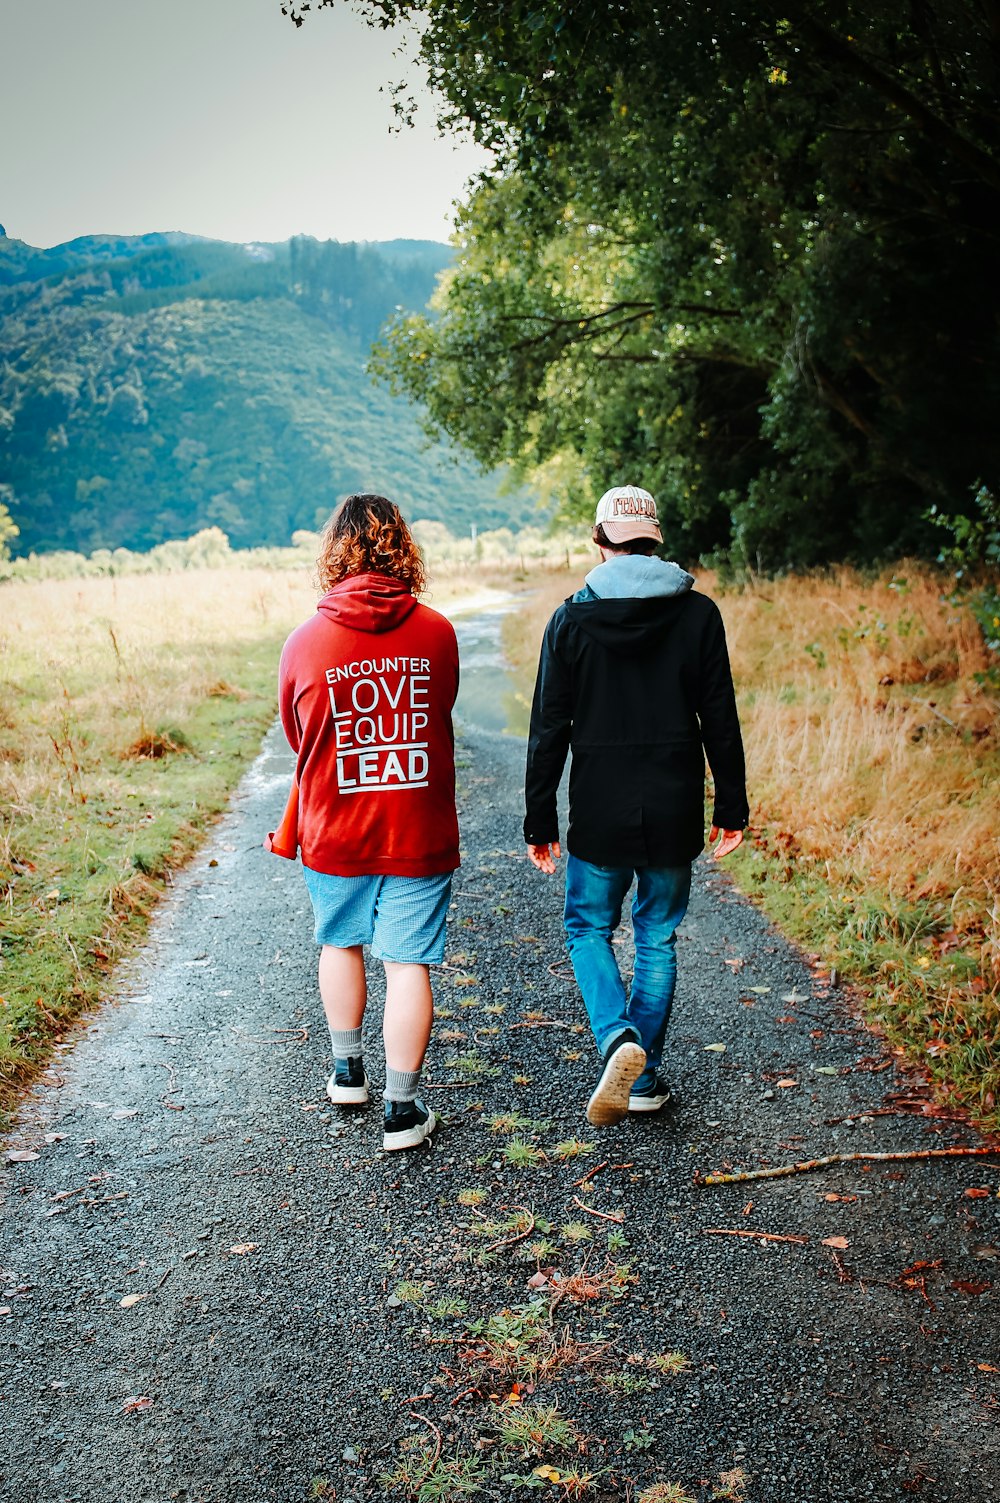 man and woman walking on road during daytime